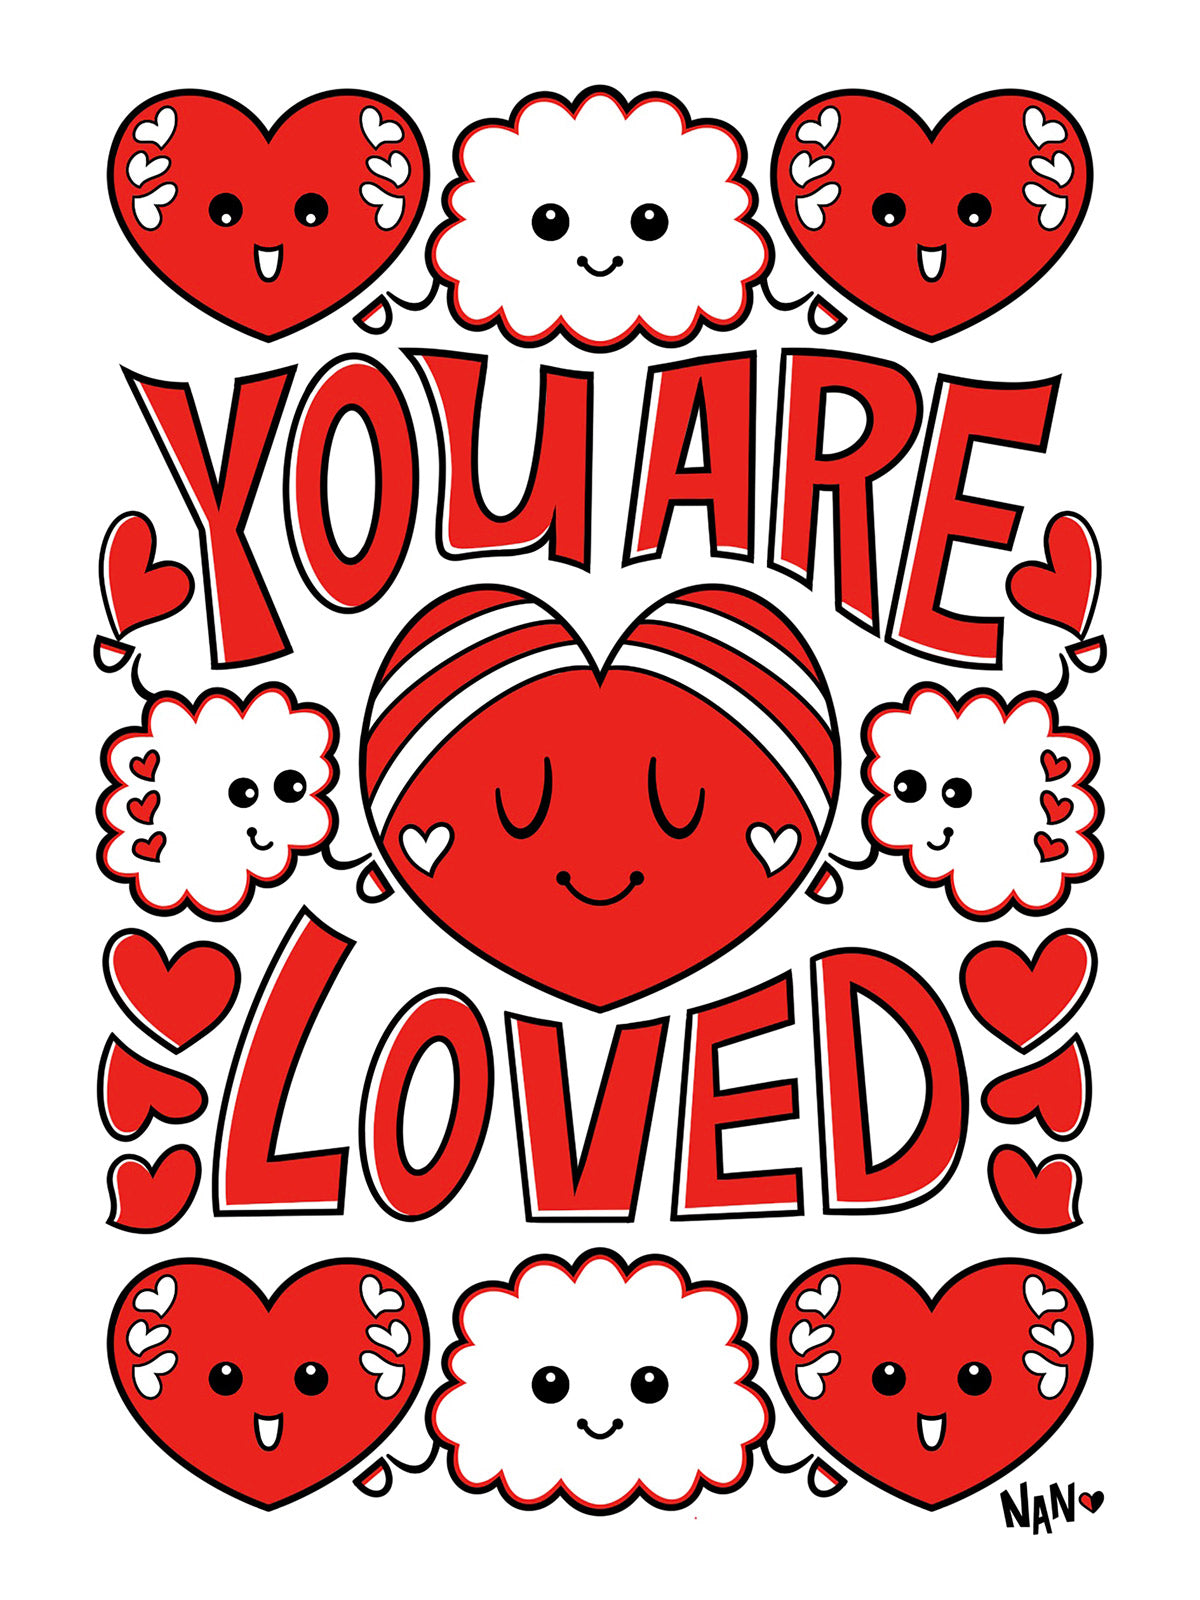 You Are Loved - Print